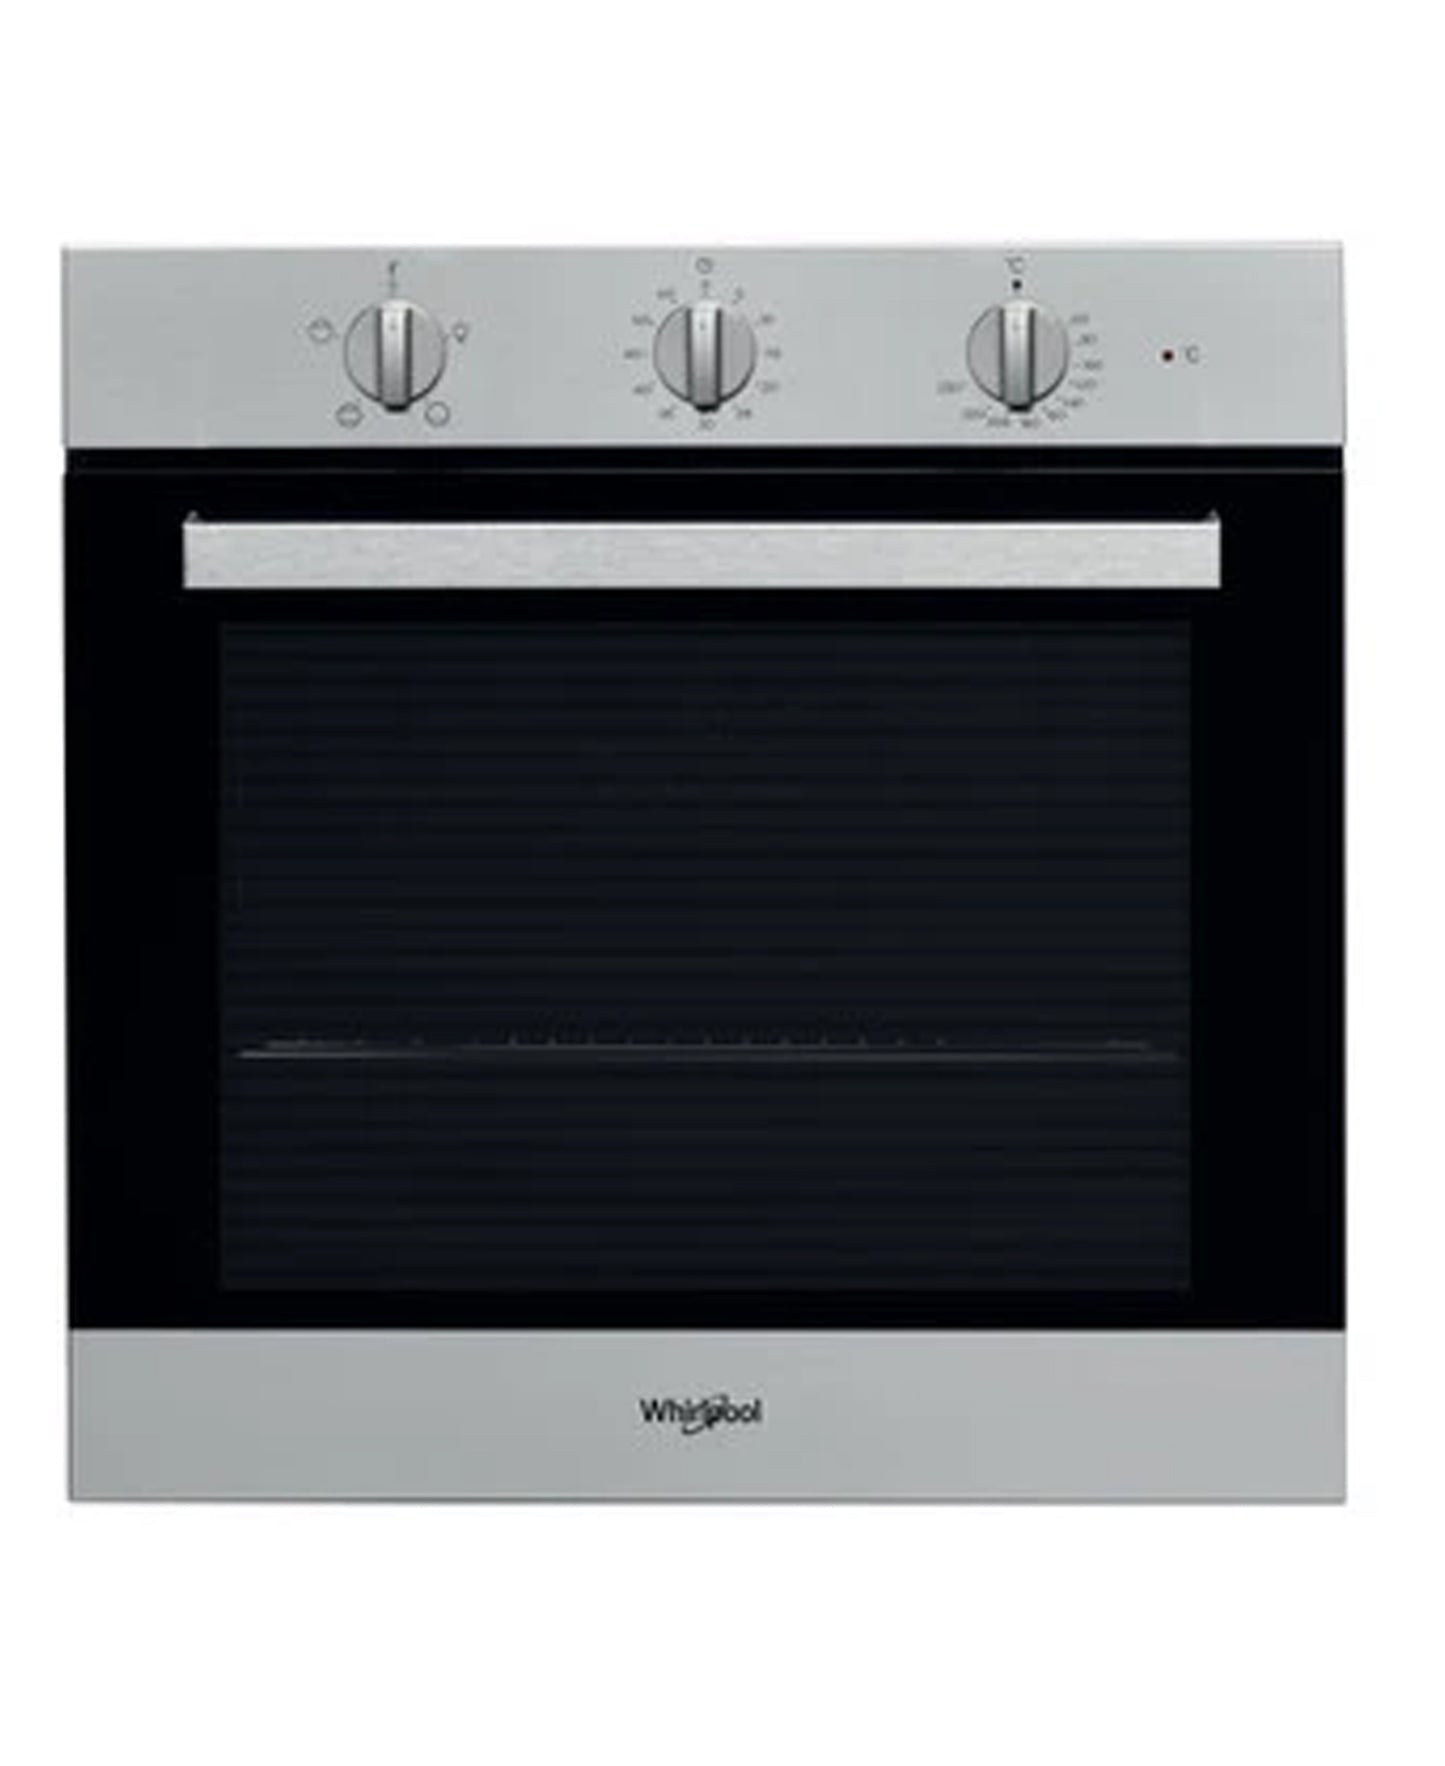 Whirlpool built -in electric oven: inox colour - AKP 603 IX